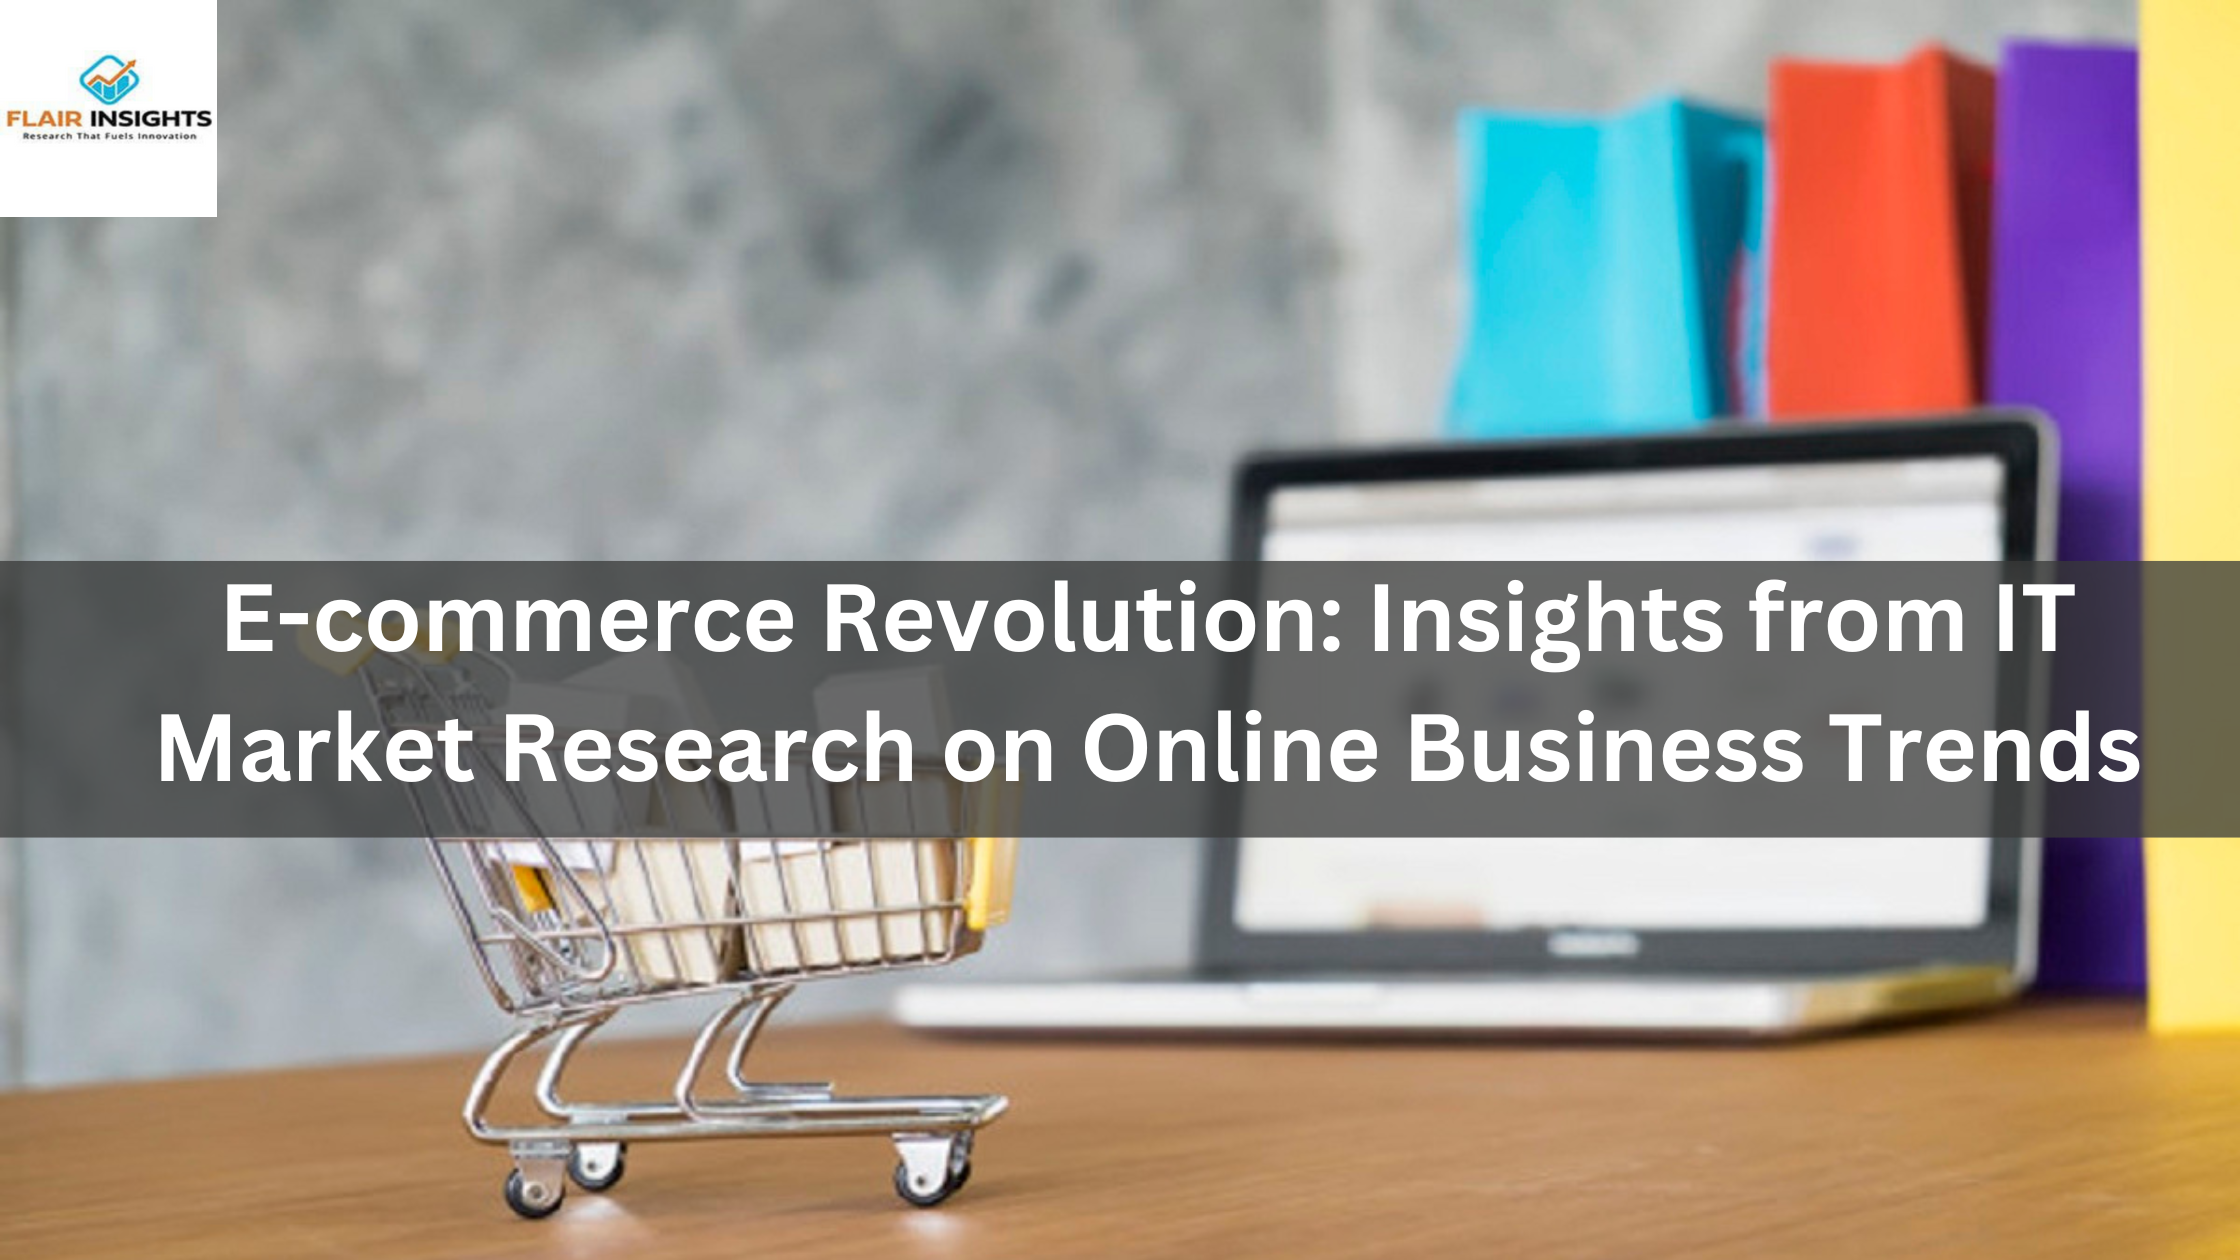 E-commerce Revolution: Insights from IT Market Research on Online Business Trends